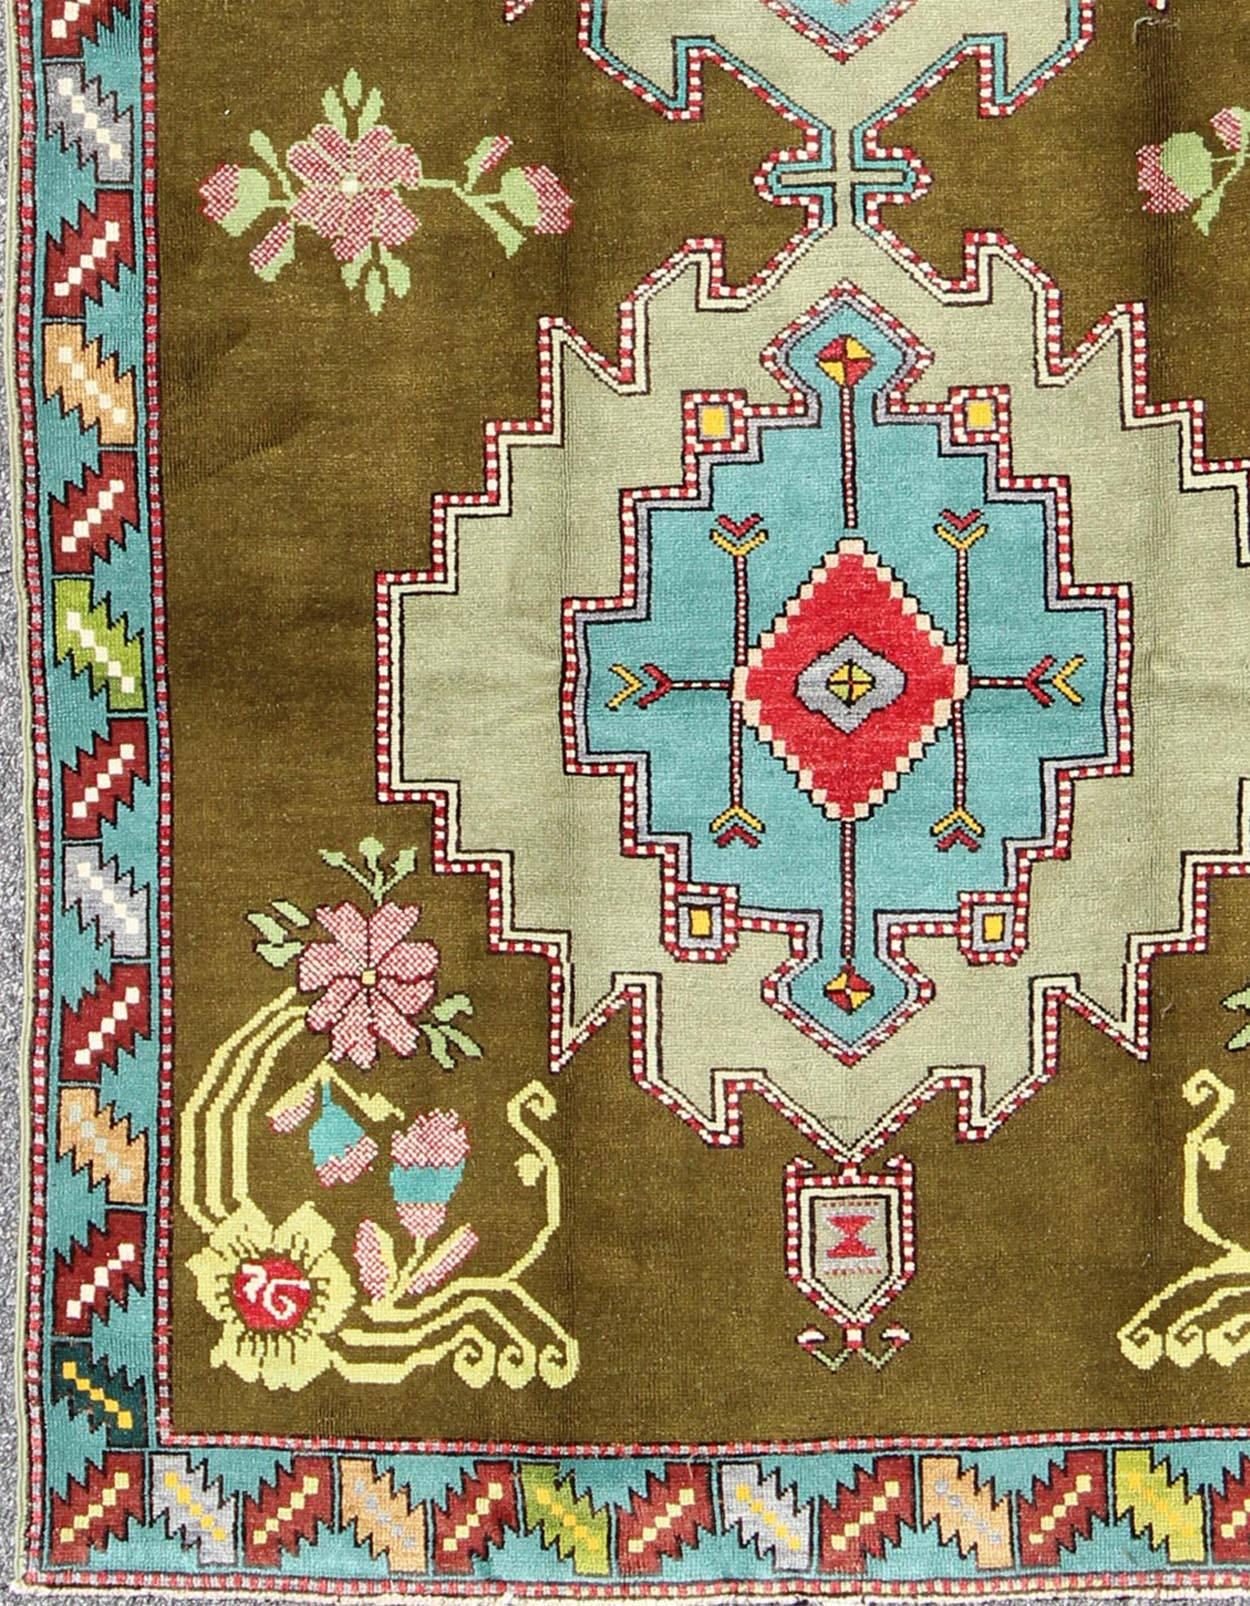 Measures: 5'10 x 9'8.
This lovely and unique Turkish carpet displays multi-layered geometric medallions. The unique colors of this piece include yellow, blue, red, teal, pink, bright yellow, salmon and many green shades of Green, including tones of